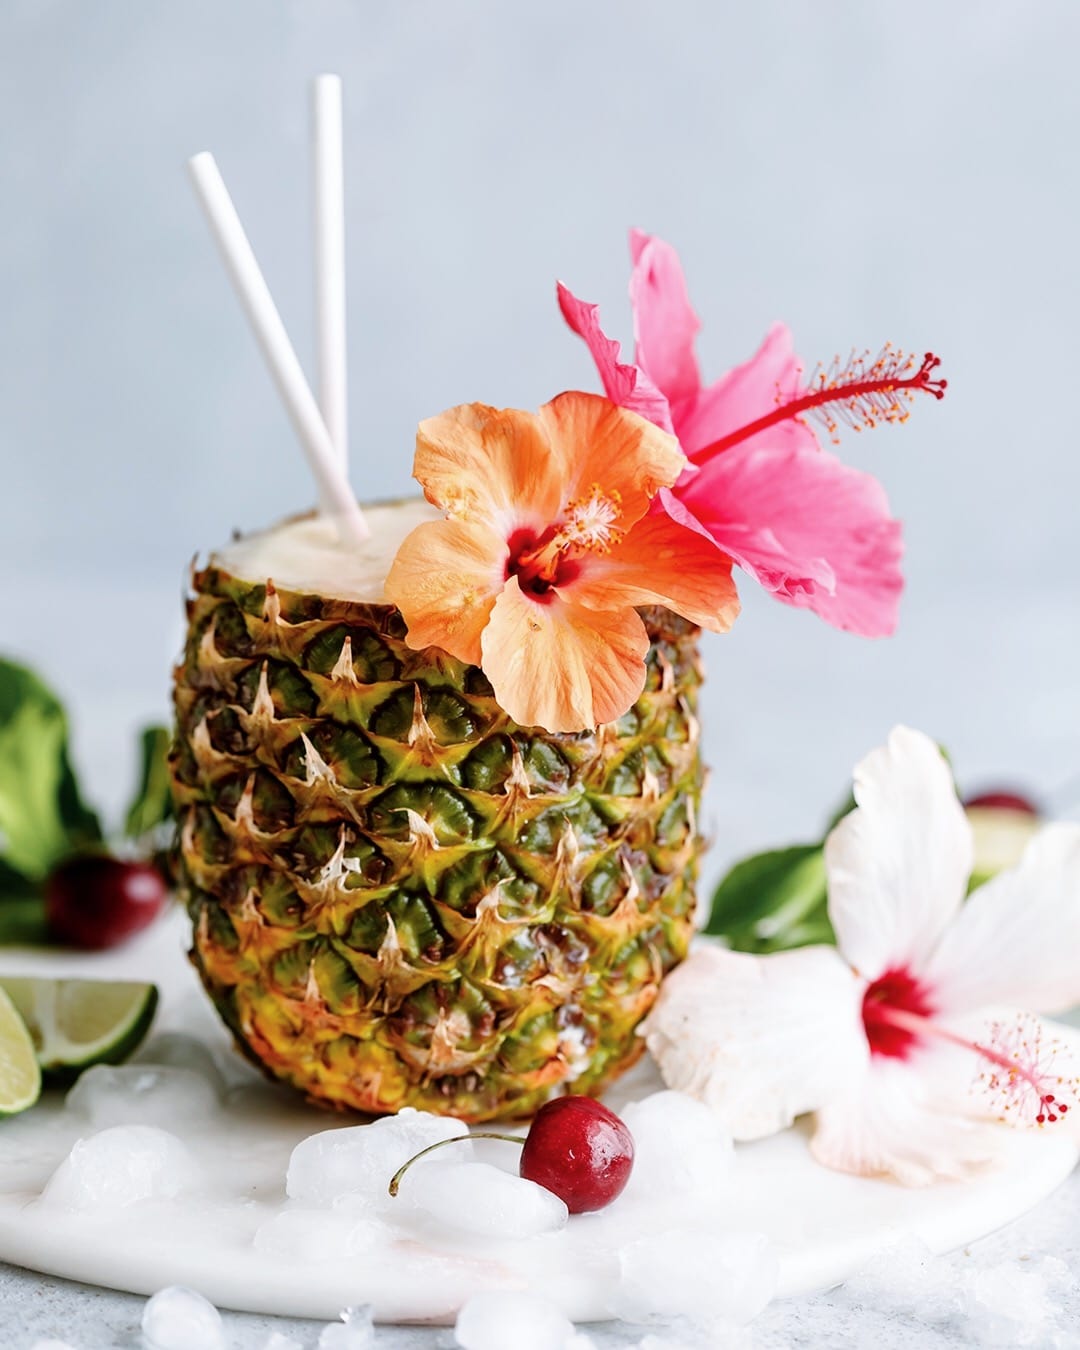 The Best Pina Colada - Yoga of Cooking